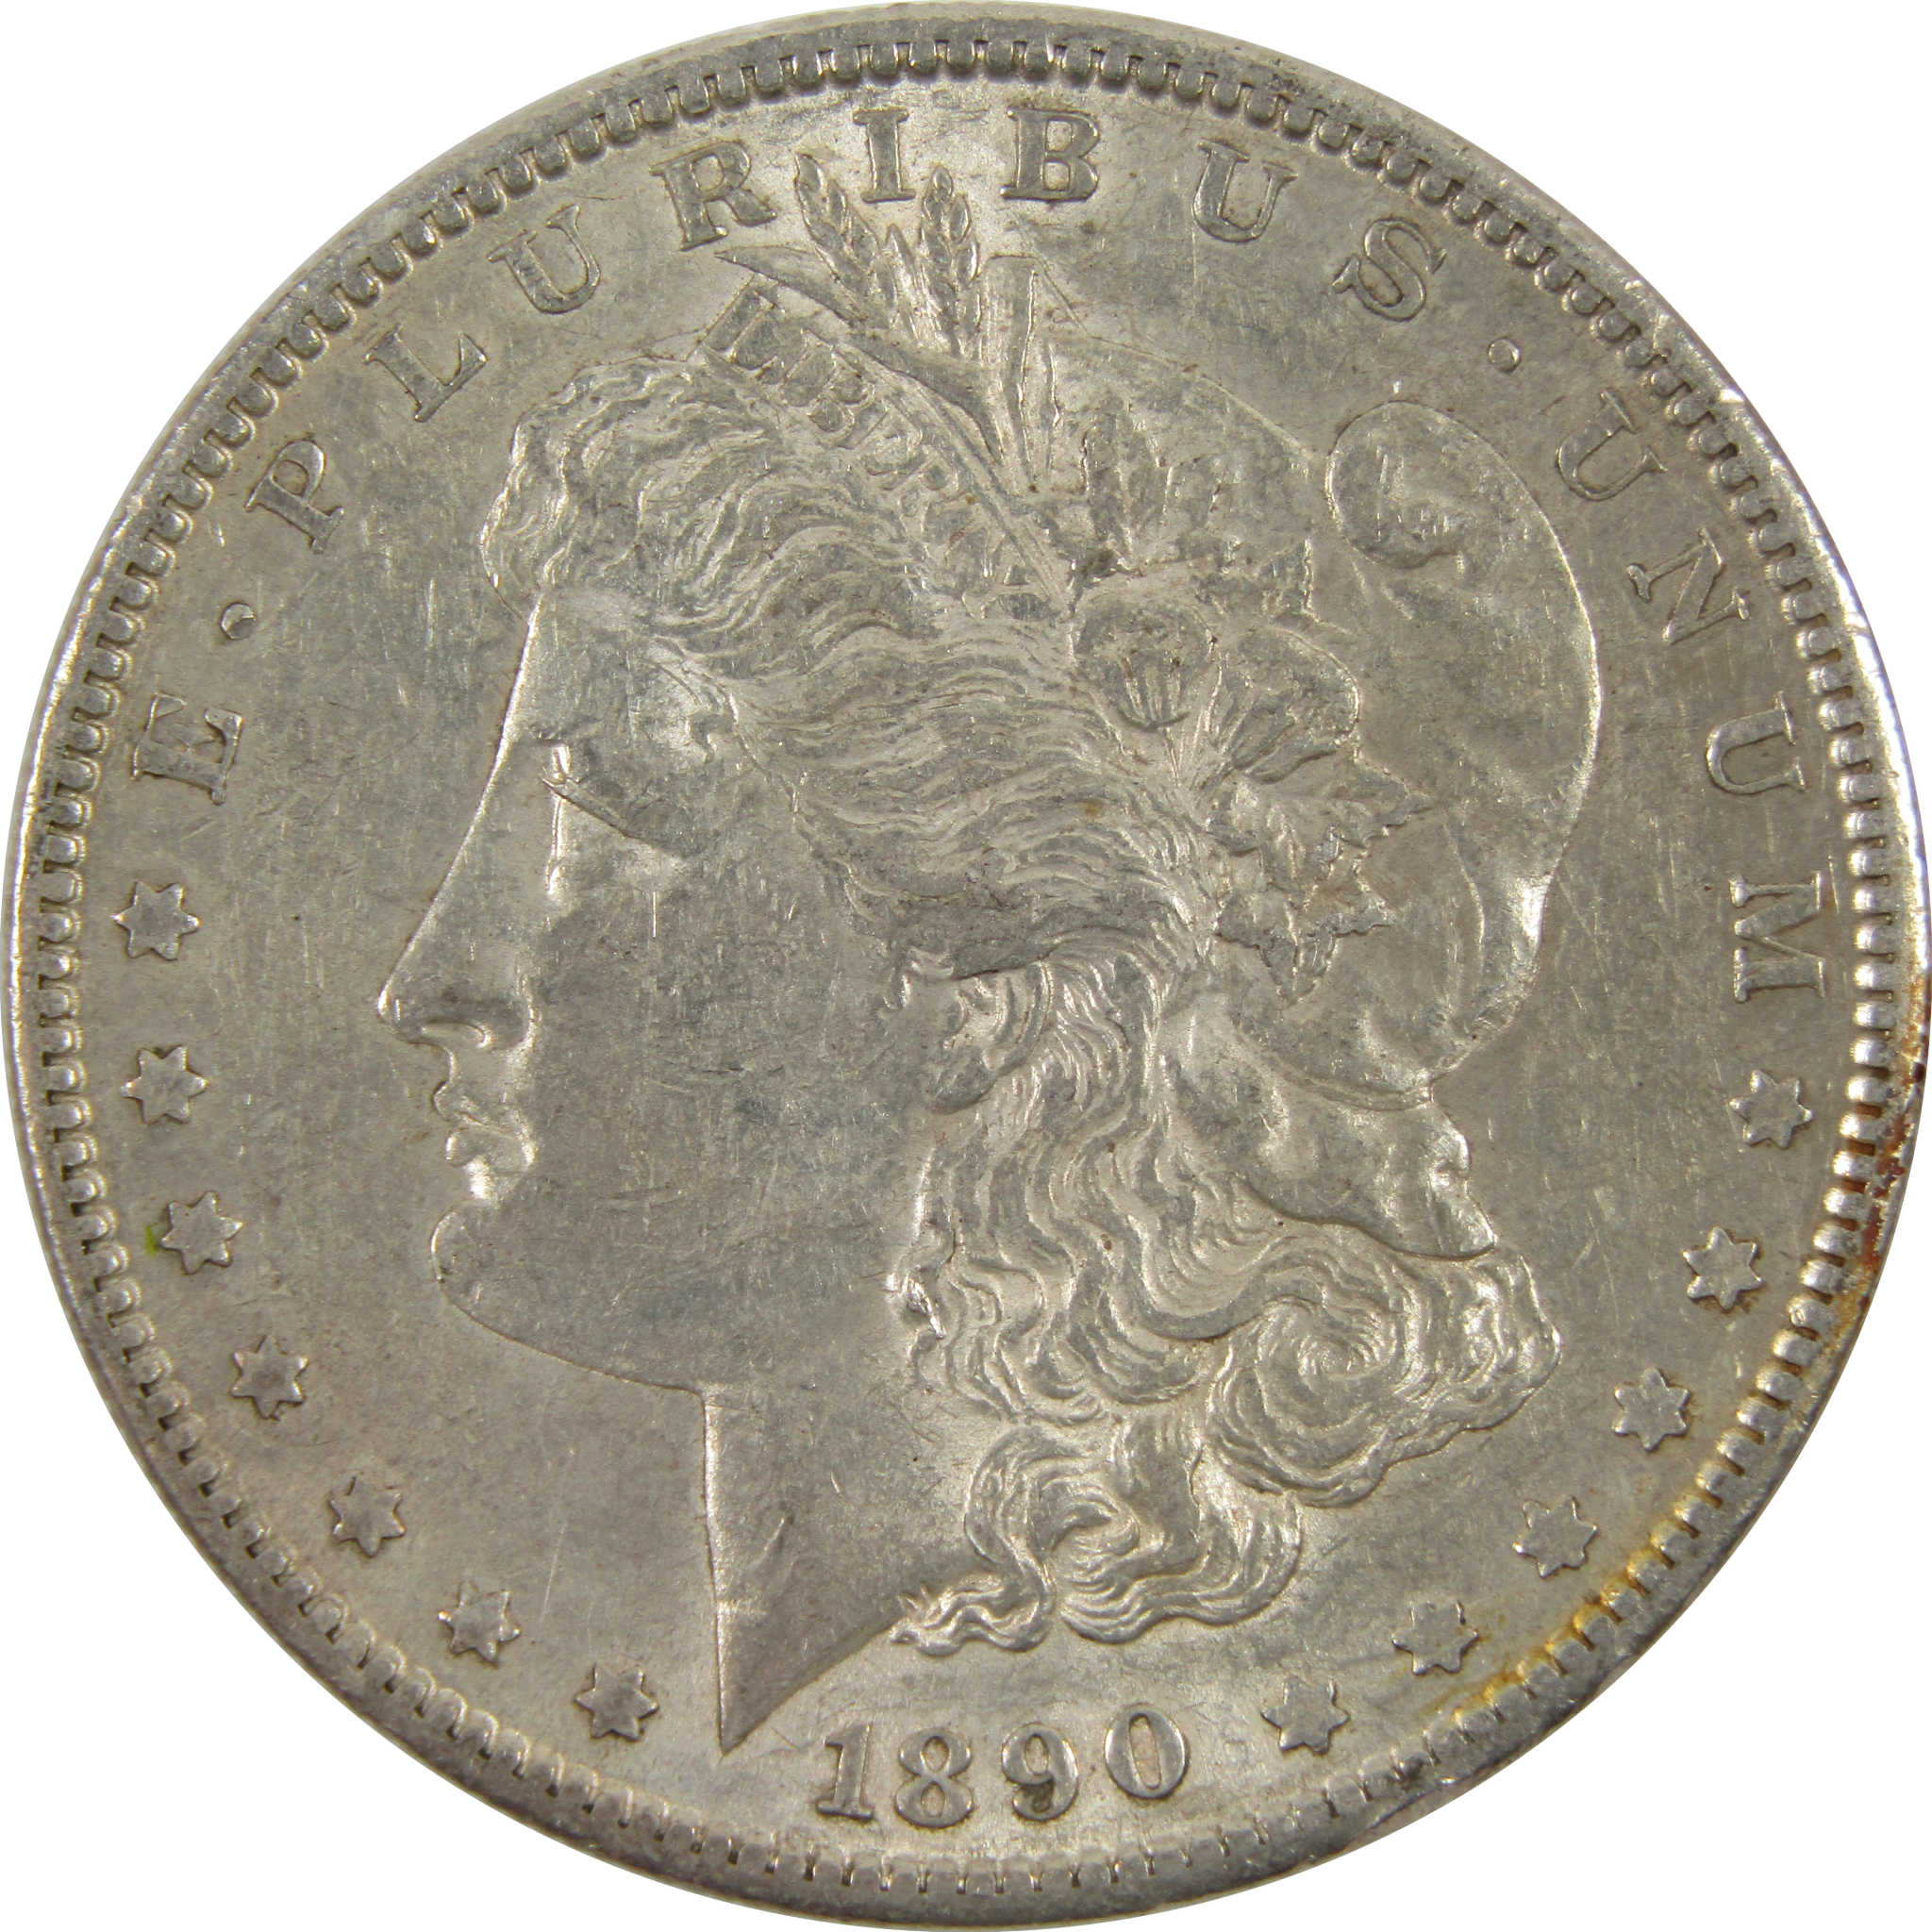 1890 S Morgan Dollar AU About Uncirculated 90% Silver SKU:I7563 - Morgan coin - Morgan silver dollar - Morgan silver dollar for sale - Profile Coins &amp; Collectibles